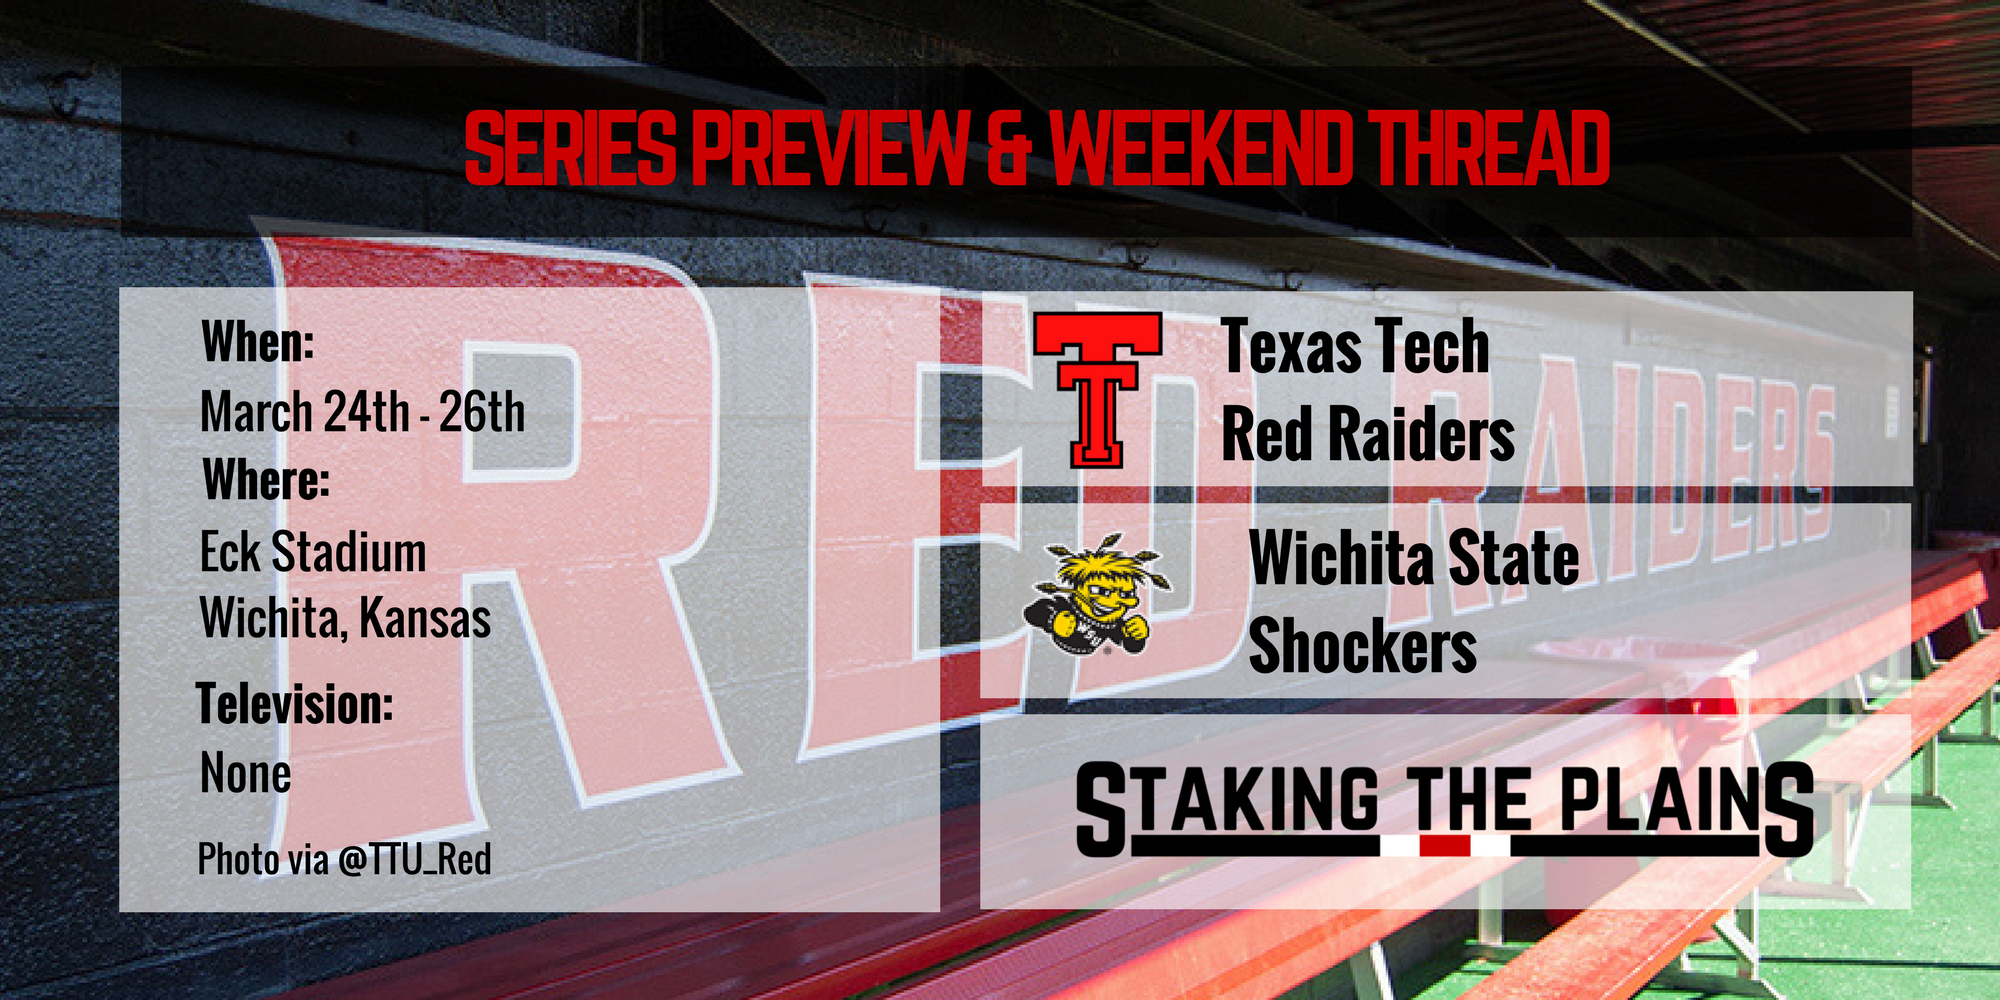 Series Preview and Weekend Thread: Texas Tech vs. Wichita State